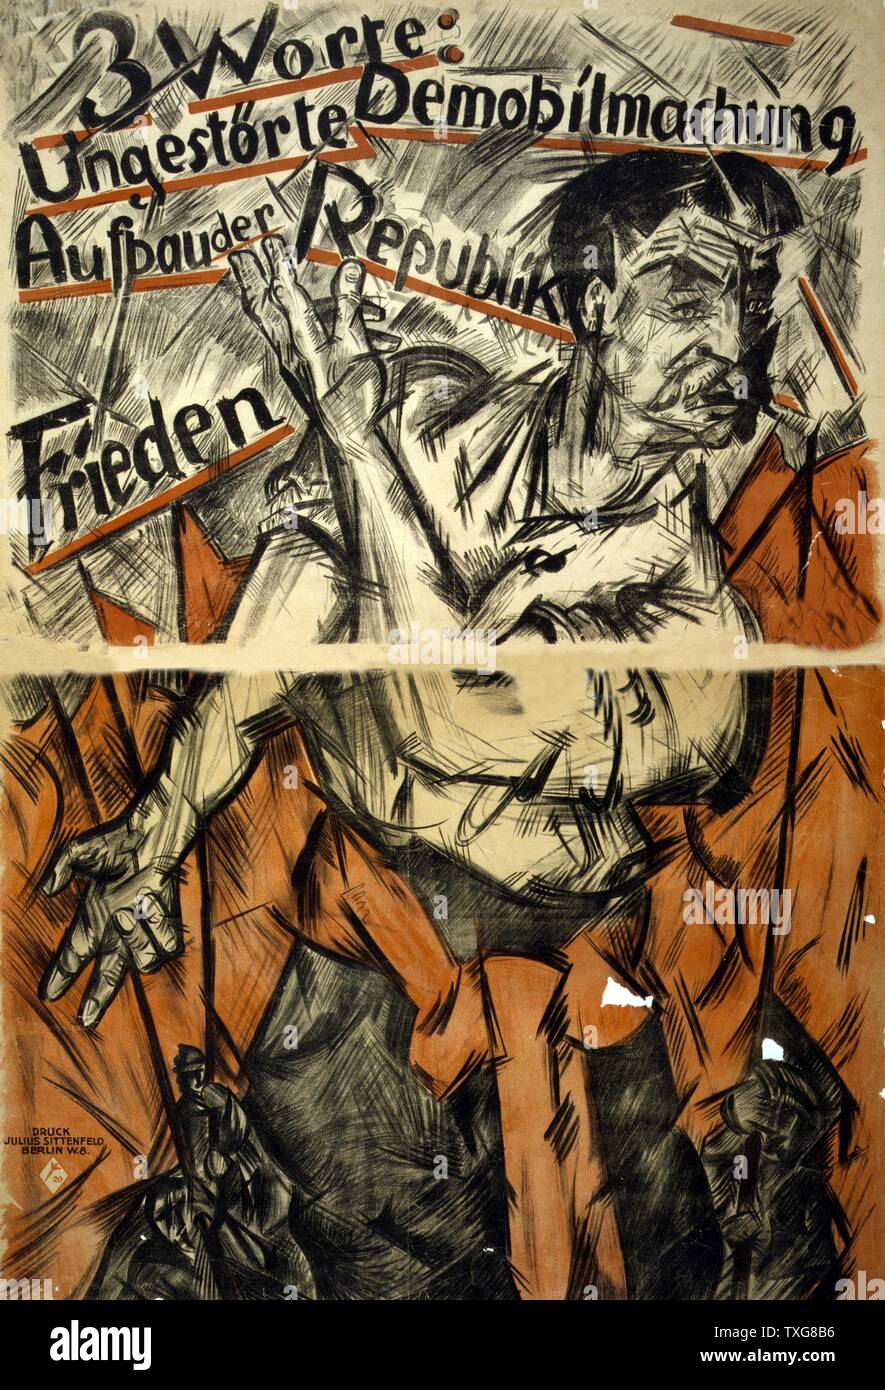 German political poster Man with red sash standing against background of red flags points to three phrases underlined in red 'Undisturbed demobilization', 'Creation of the Republic', 'Peace' Stock Photo